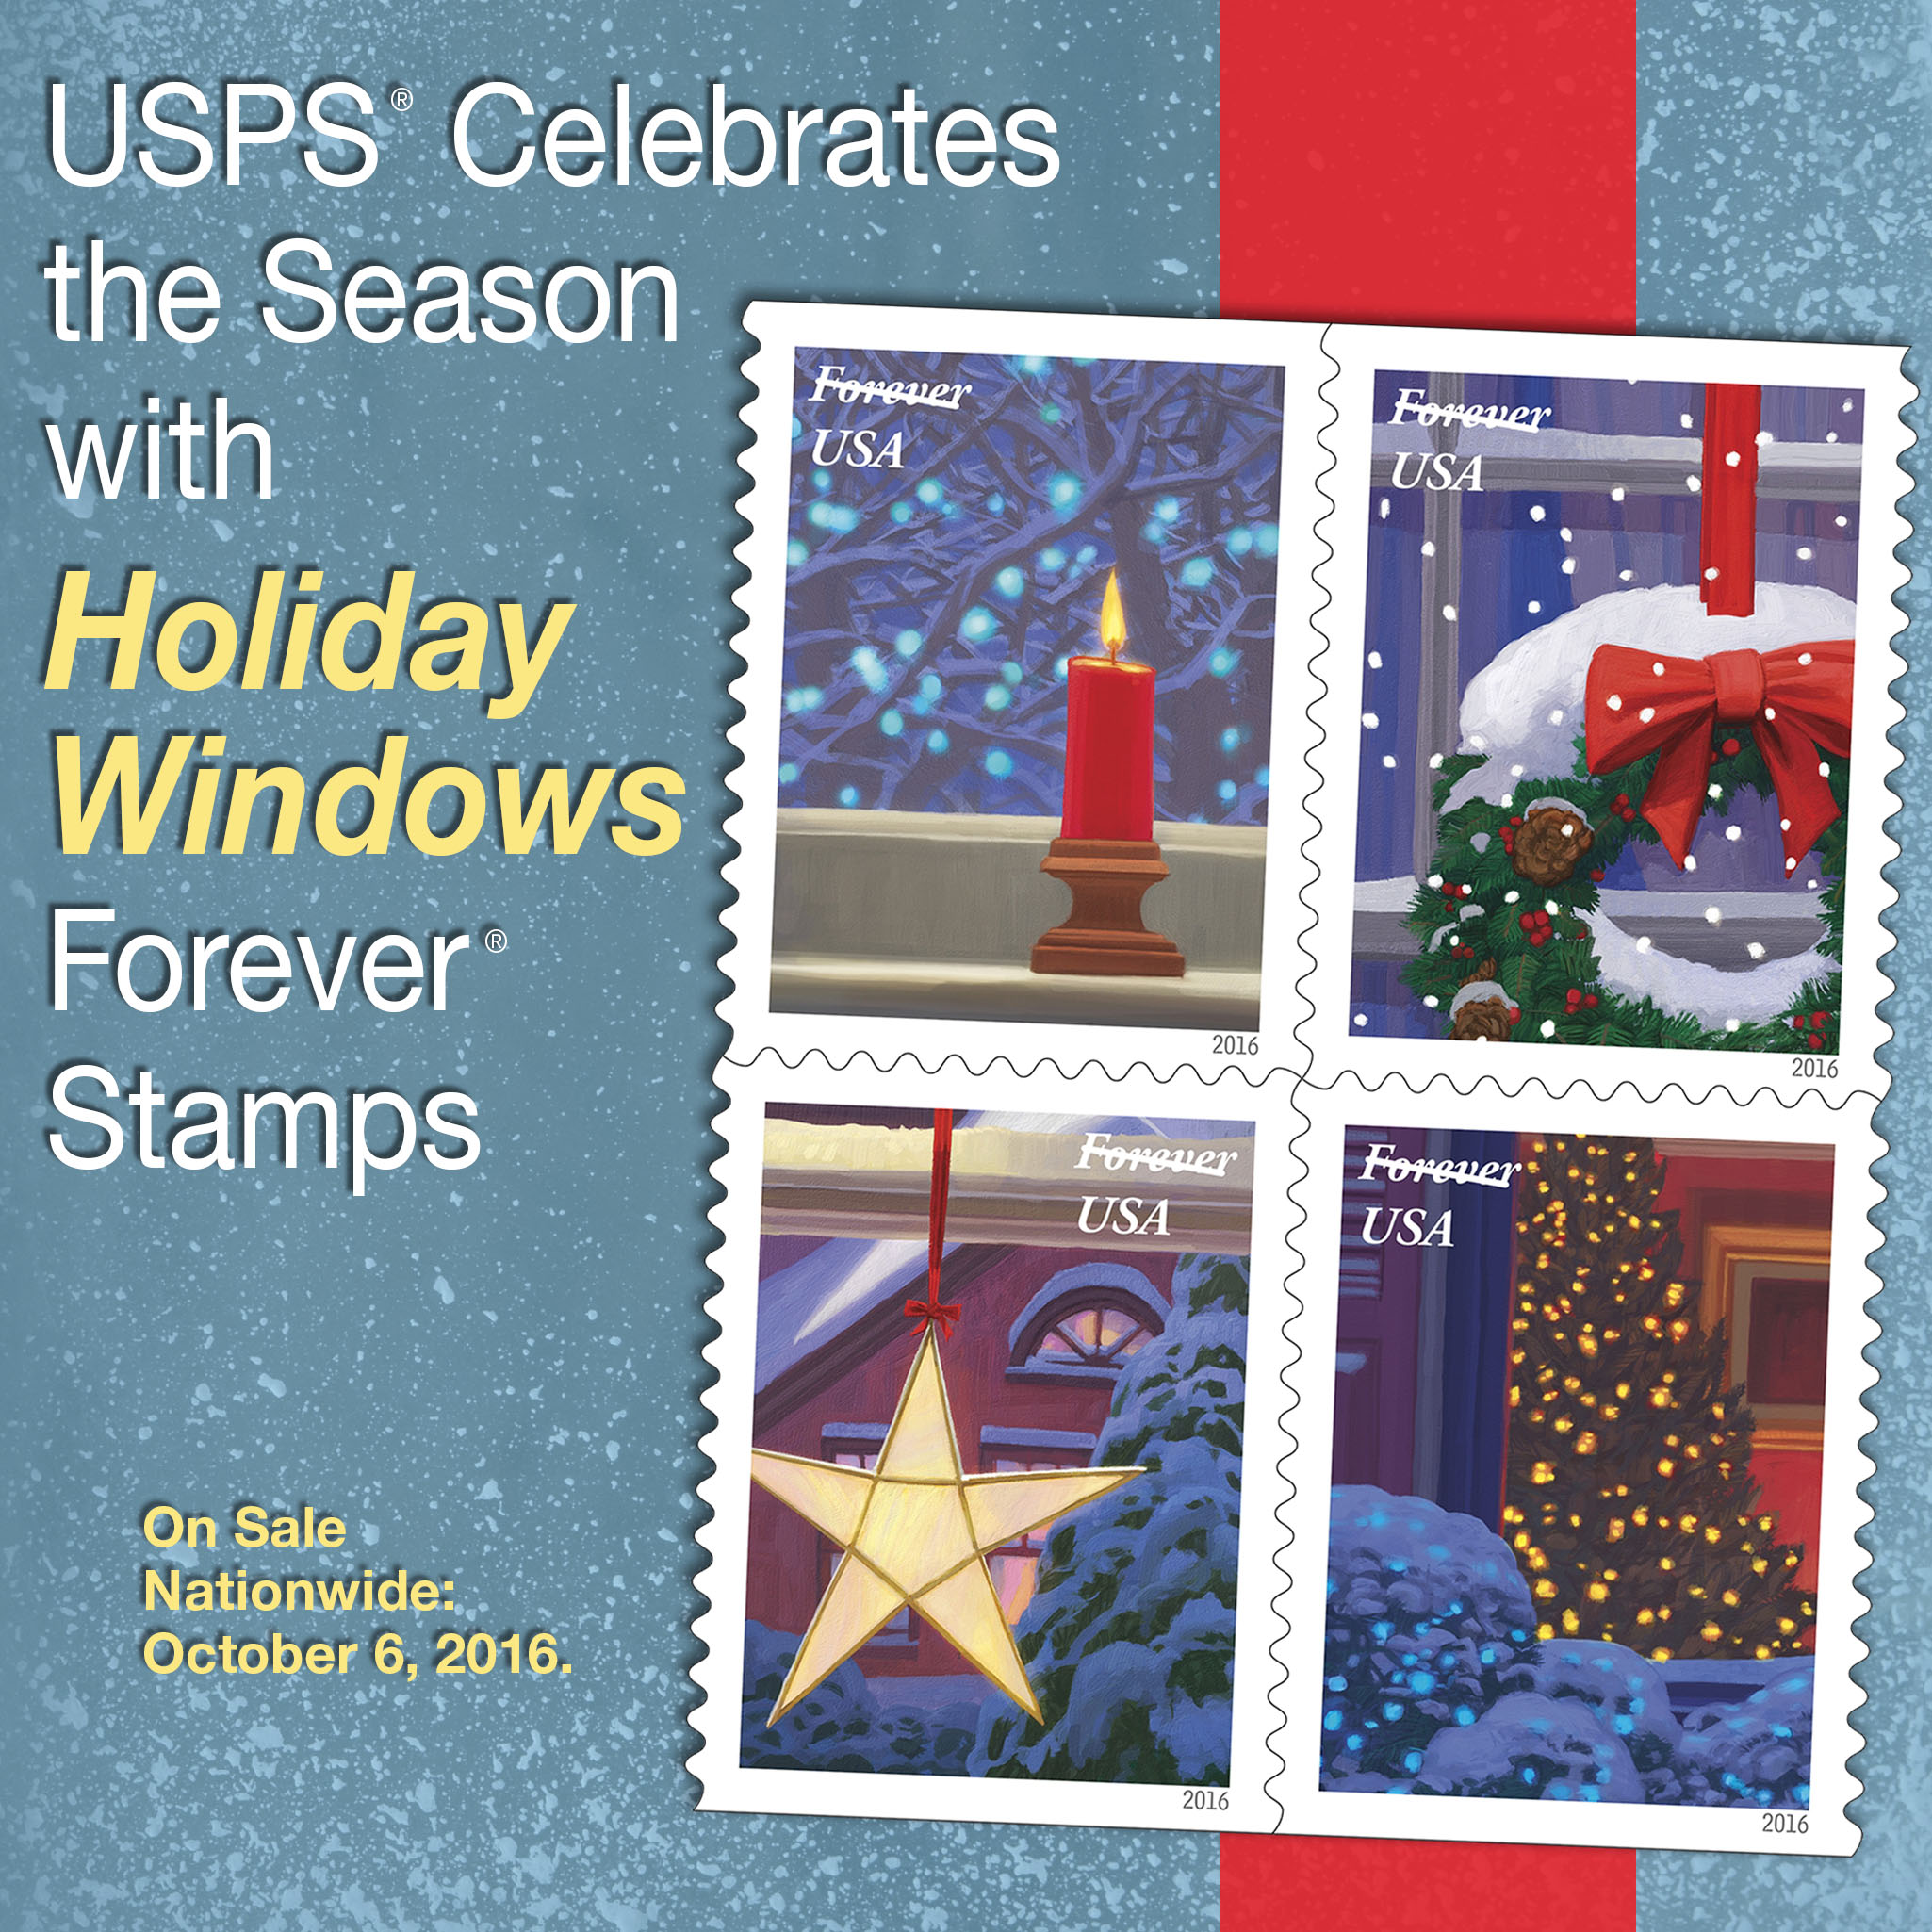 USPS Celebrates the Season with Holiday Windows, Forever Stamps. On sale Nationwide:October 6, 2016